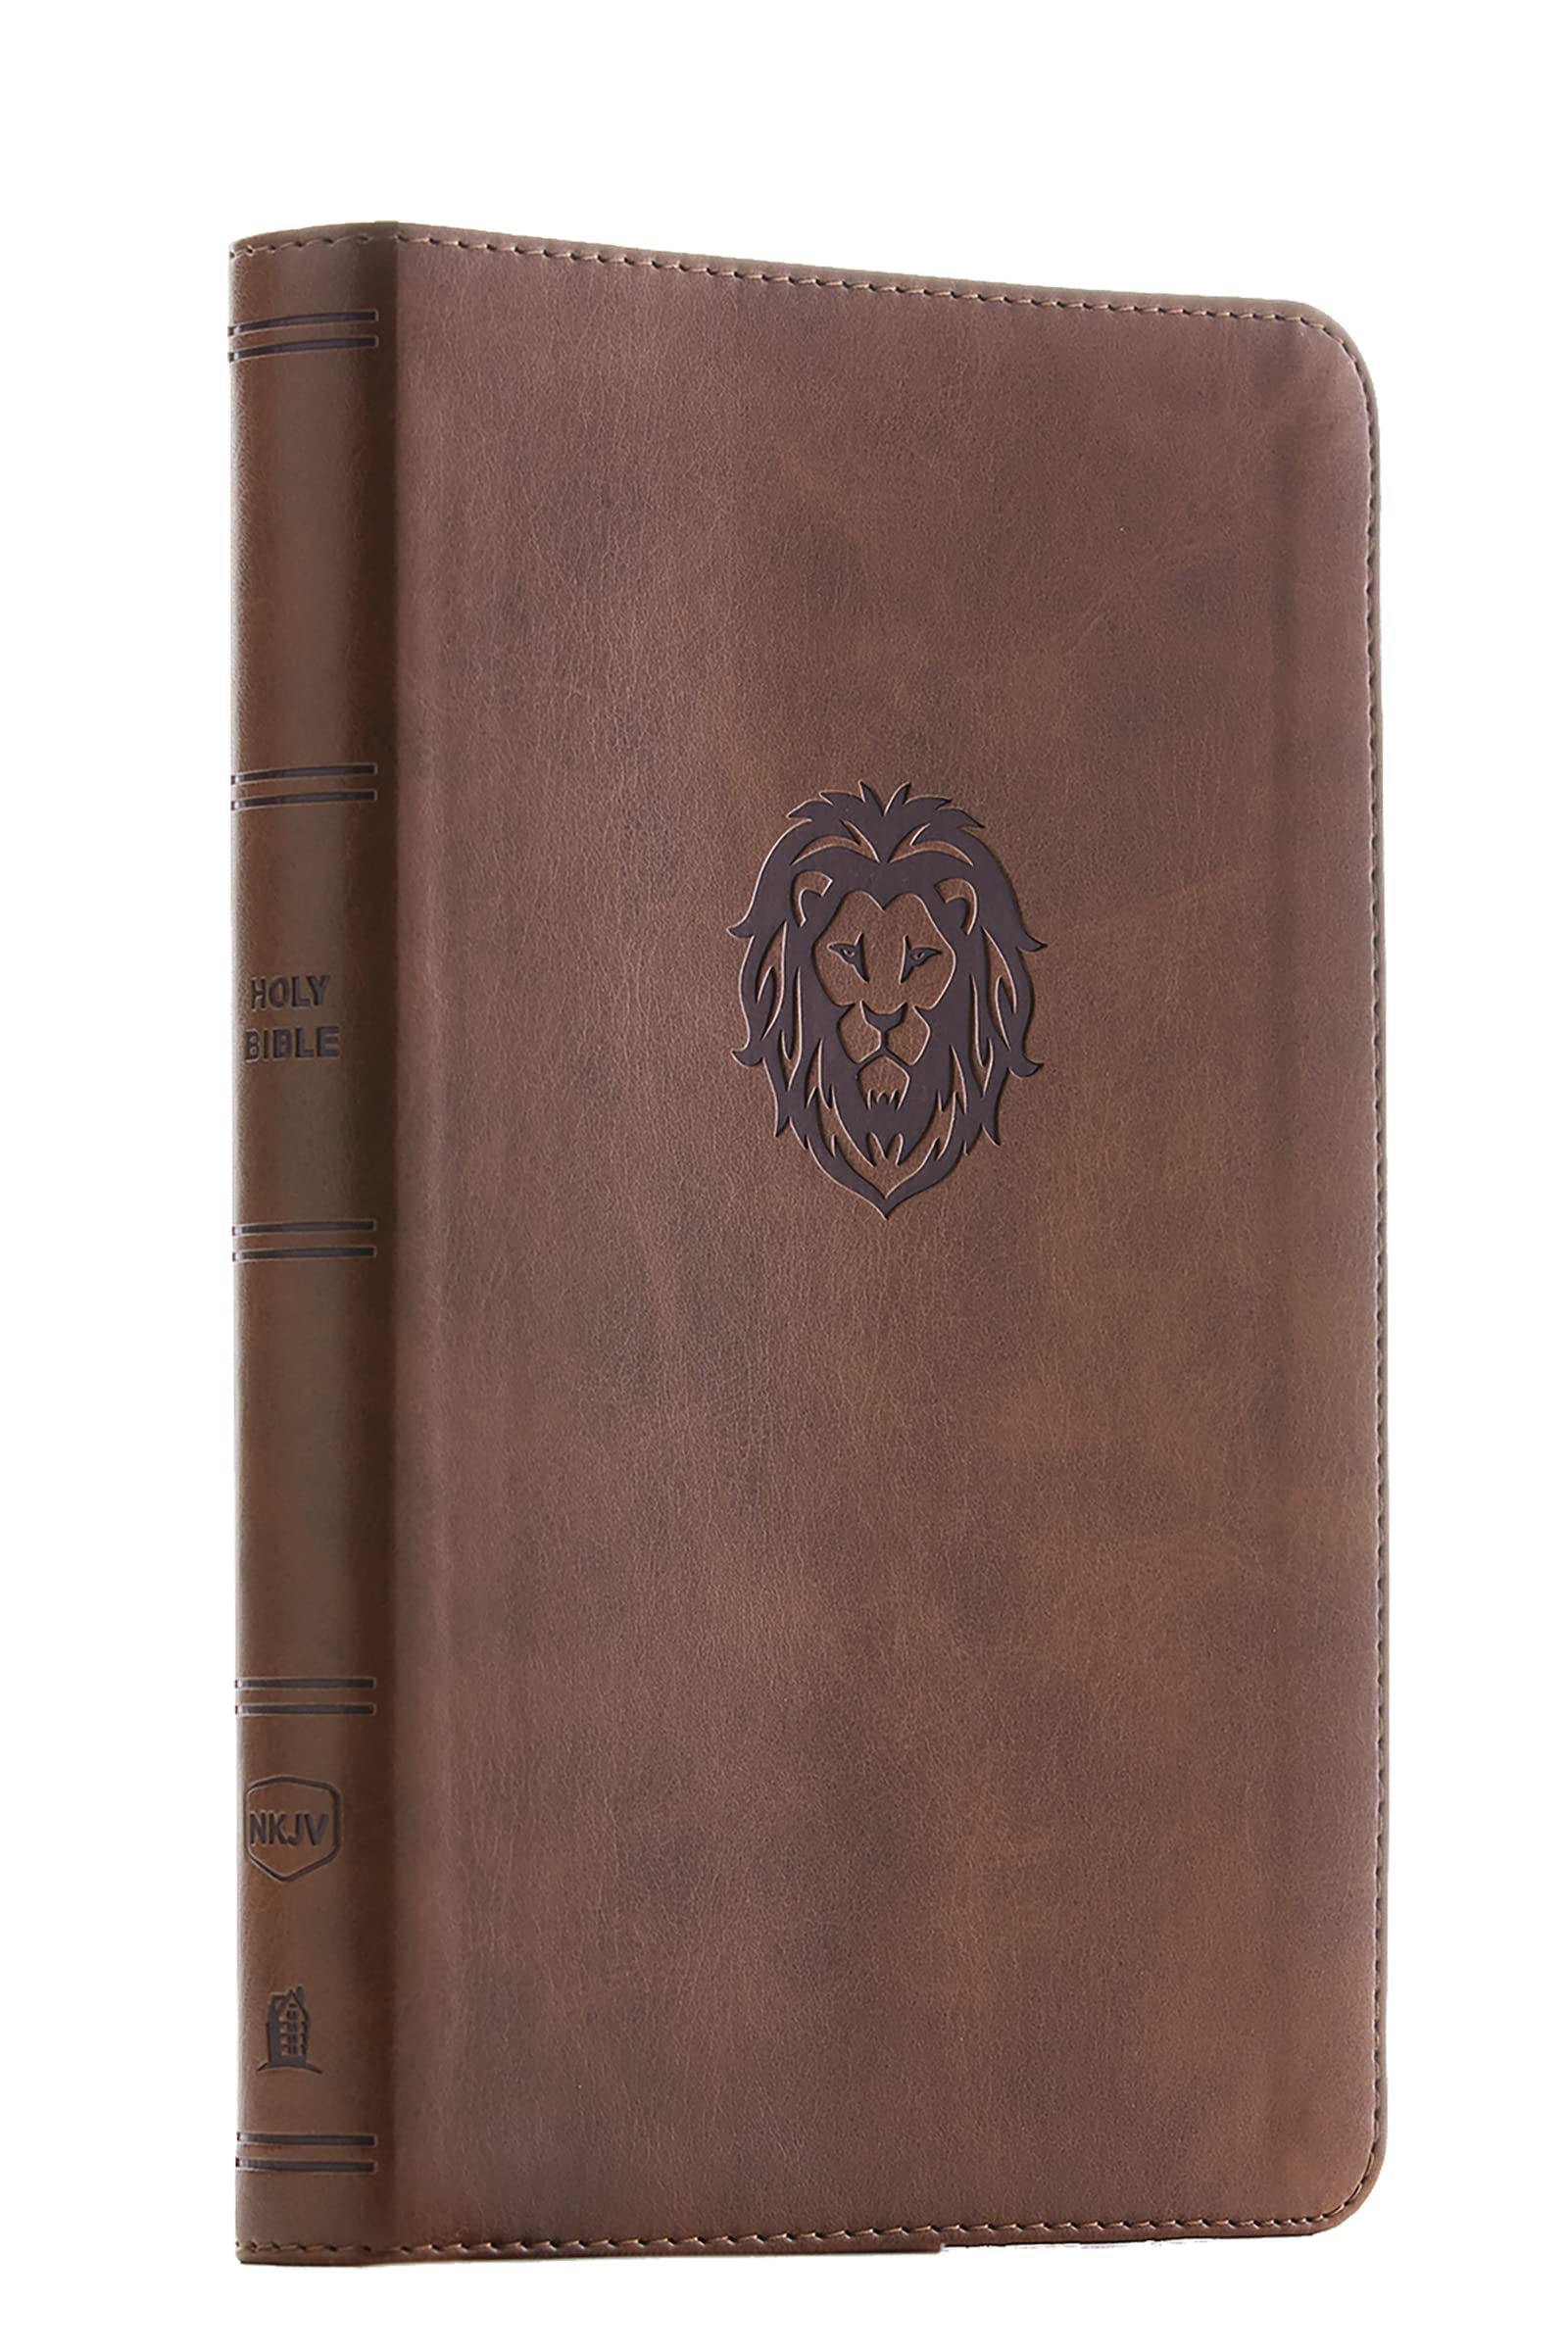 Nkjv, Thinline Bible Youth Edition, Leathersoft, Brown, Red Letter Edition, Comfort Print by Thomas Nelson